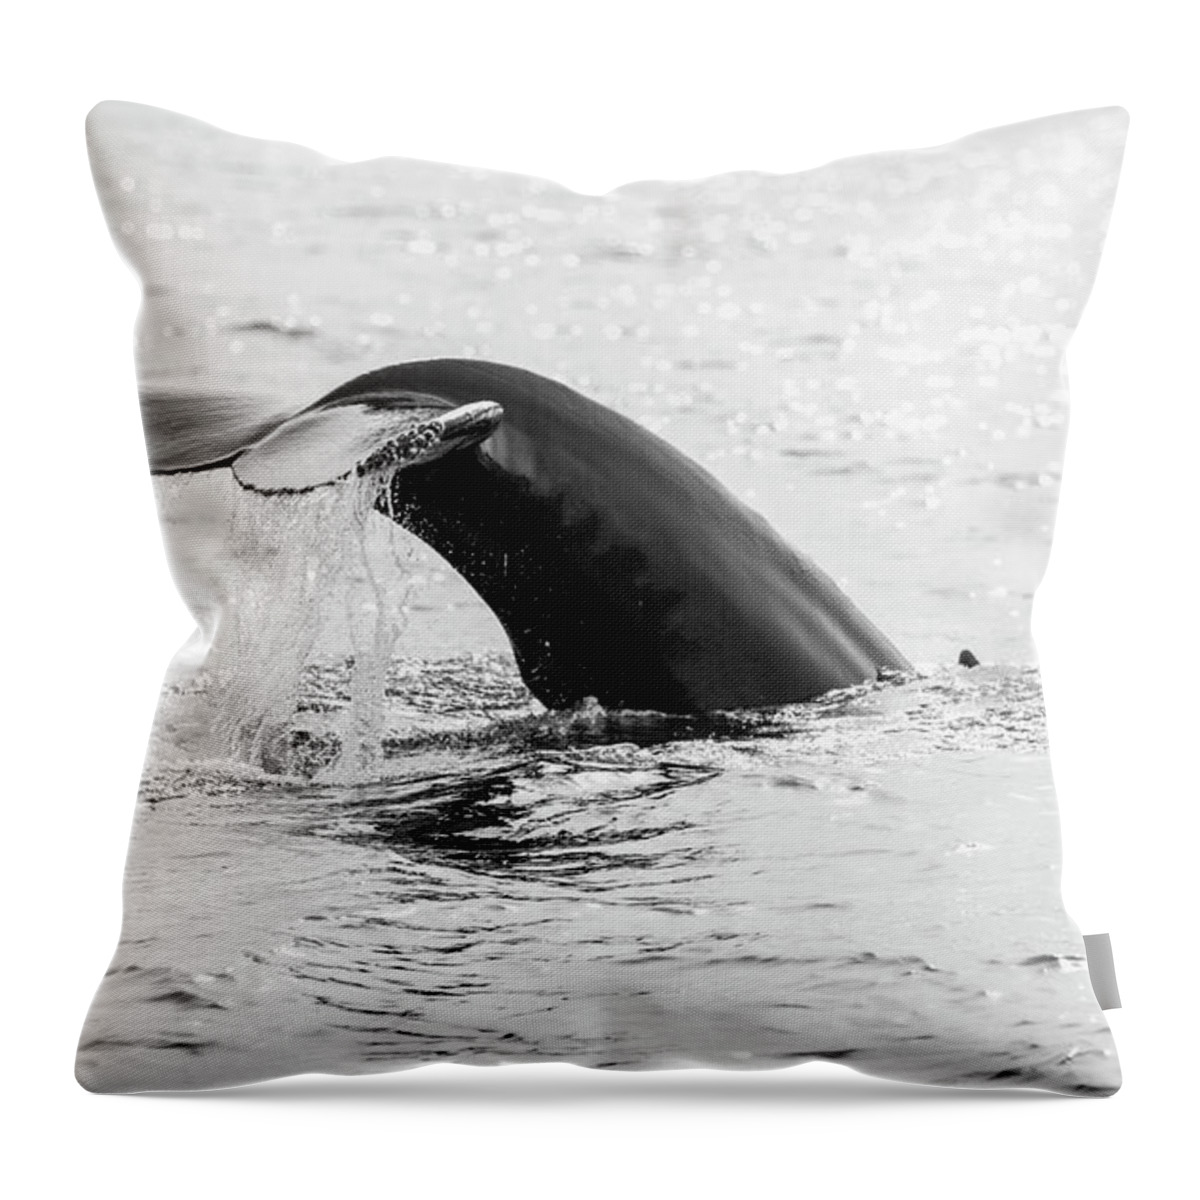 Diving Into Water Throw Pillow featuring the photograph Diving Humpback Whale by Ian Gethings